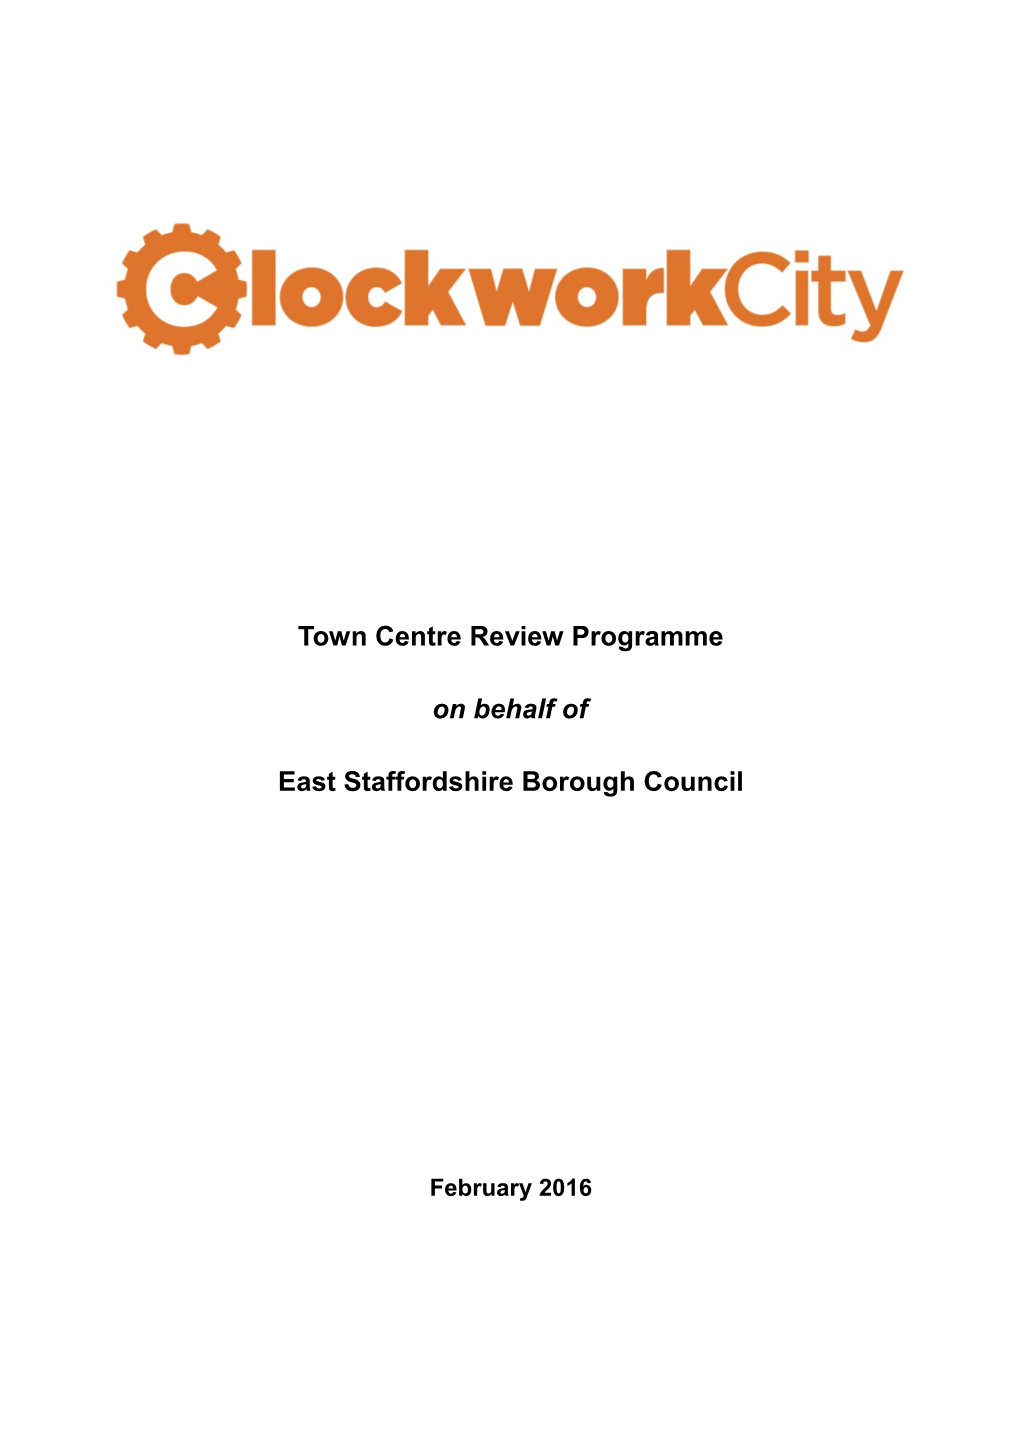 Town Centre Review Programme on Behalf of East Staffordshire